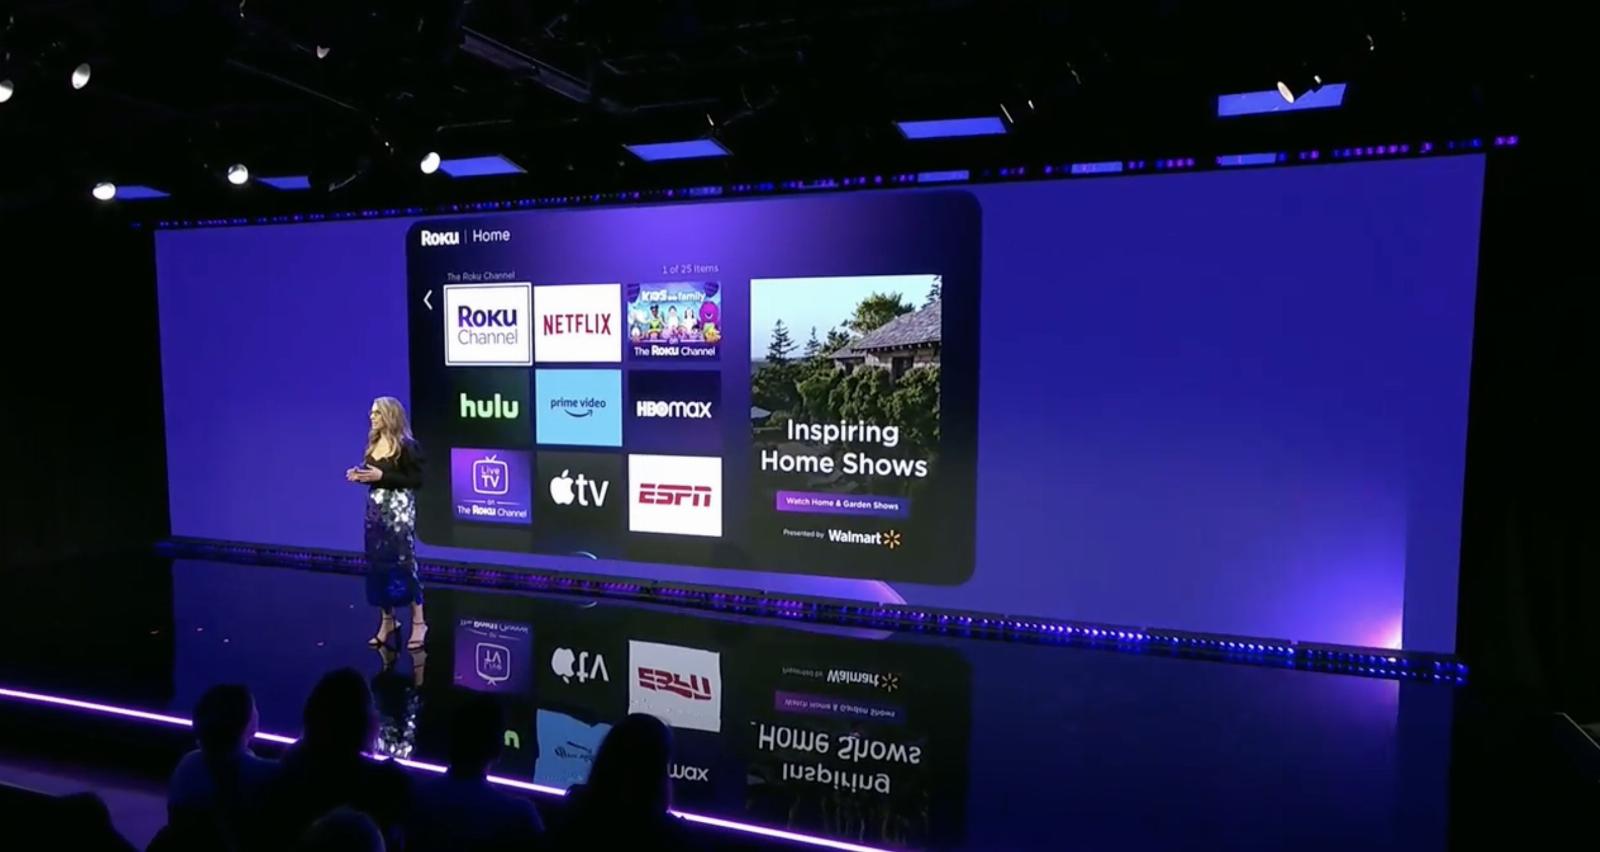 Roku touts its new ad products, including an AI that matches campaigns to TV moments